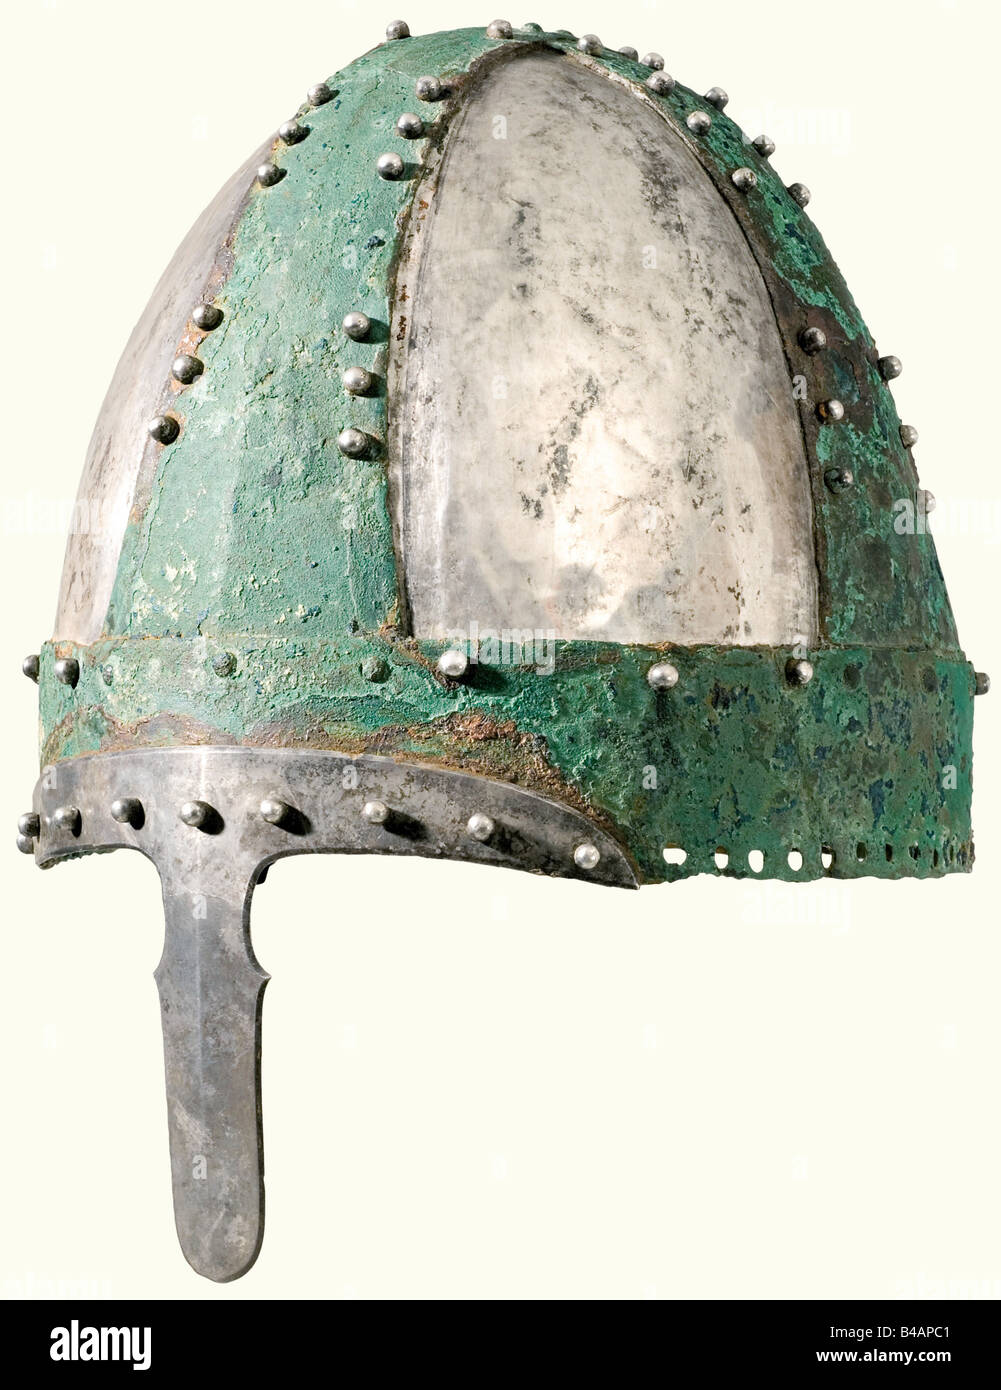 A princely 'Spangenhelm', Central and Eastern Europe, 5th - 6th century A.D. Bronze, calotte-shaped, segmented helmet with riveted silver plates. The pierced forehead b historic, historical, ancient world, ancient world, ancient times, object, objects, stills, clipping, cut out, cut-out, cut-outs, Stock Photo